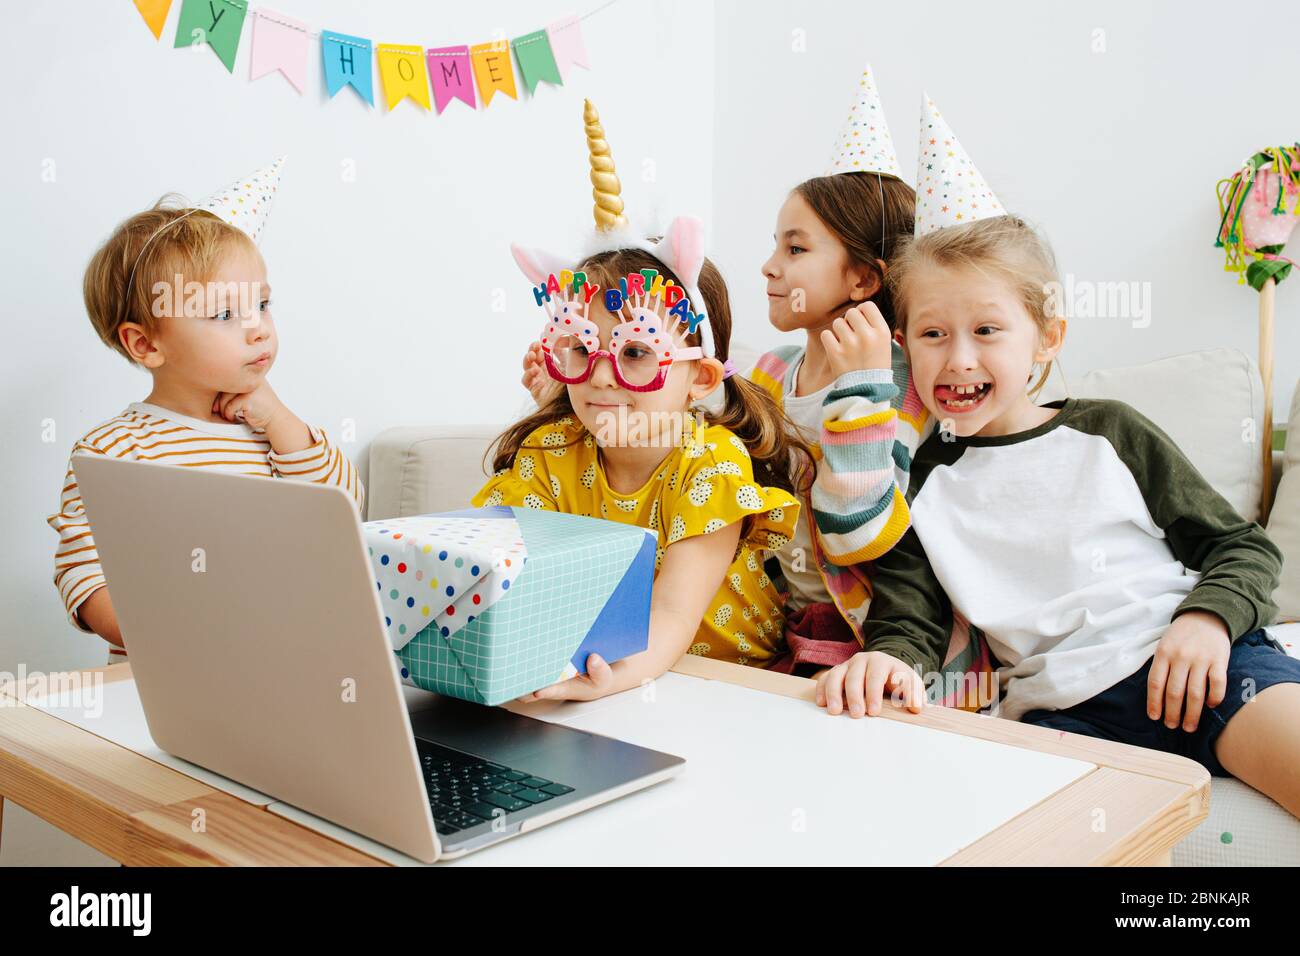 Little girl showing birthday present on a webcam, surrounded by friends Stock Photo